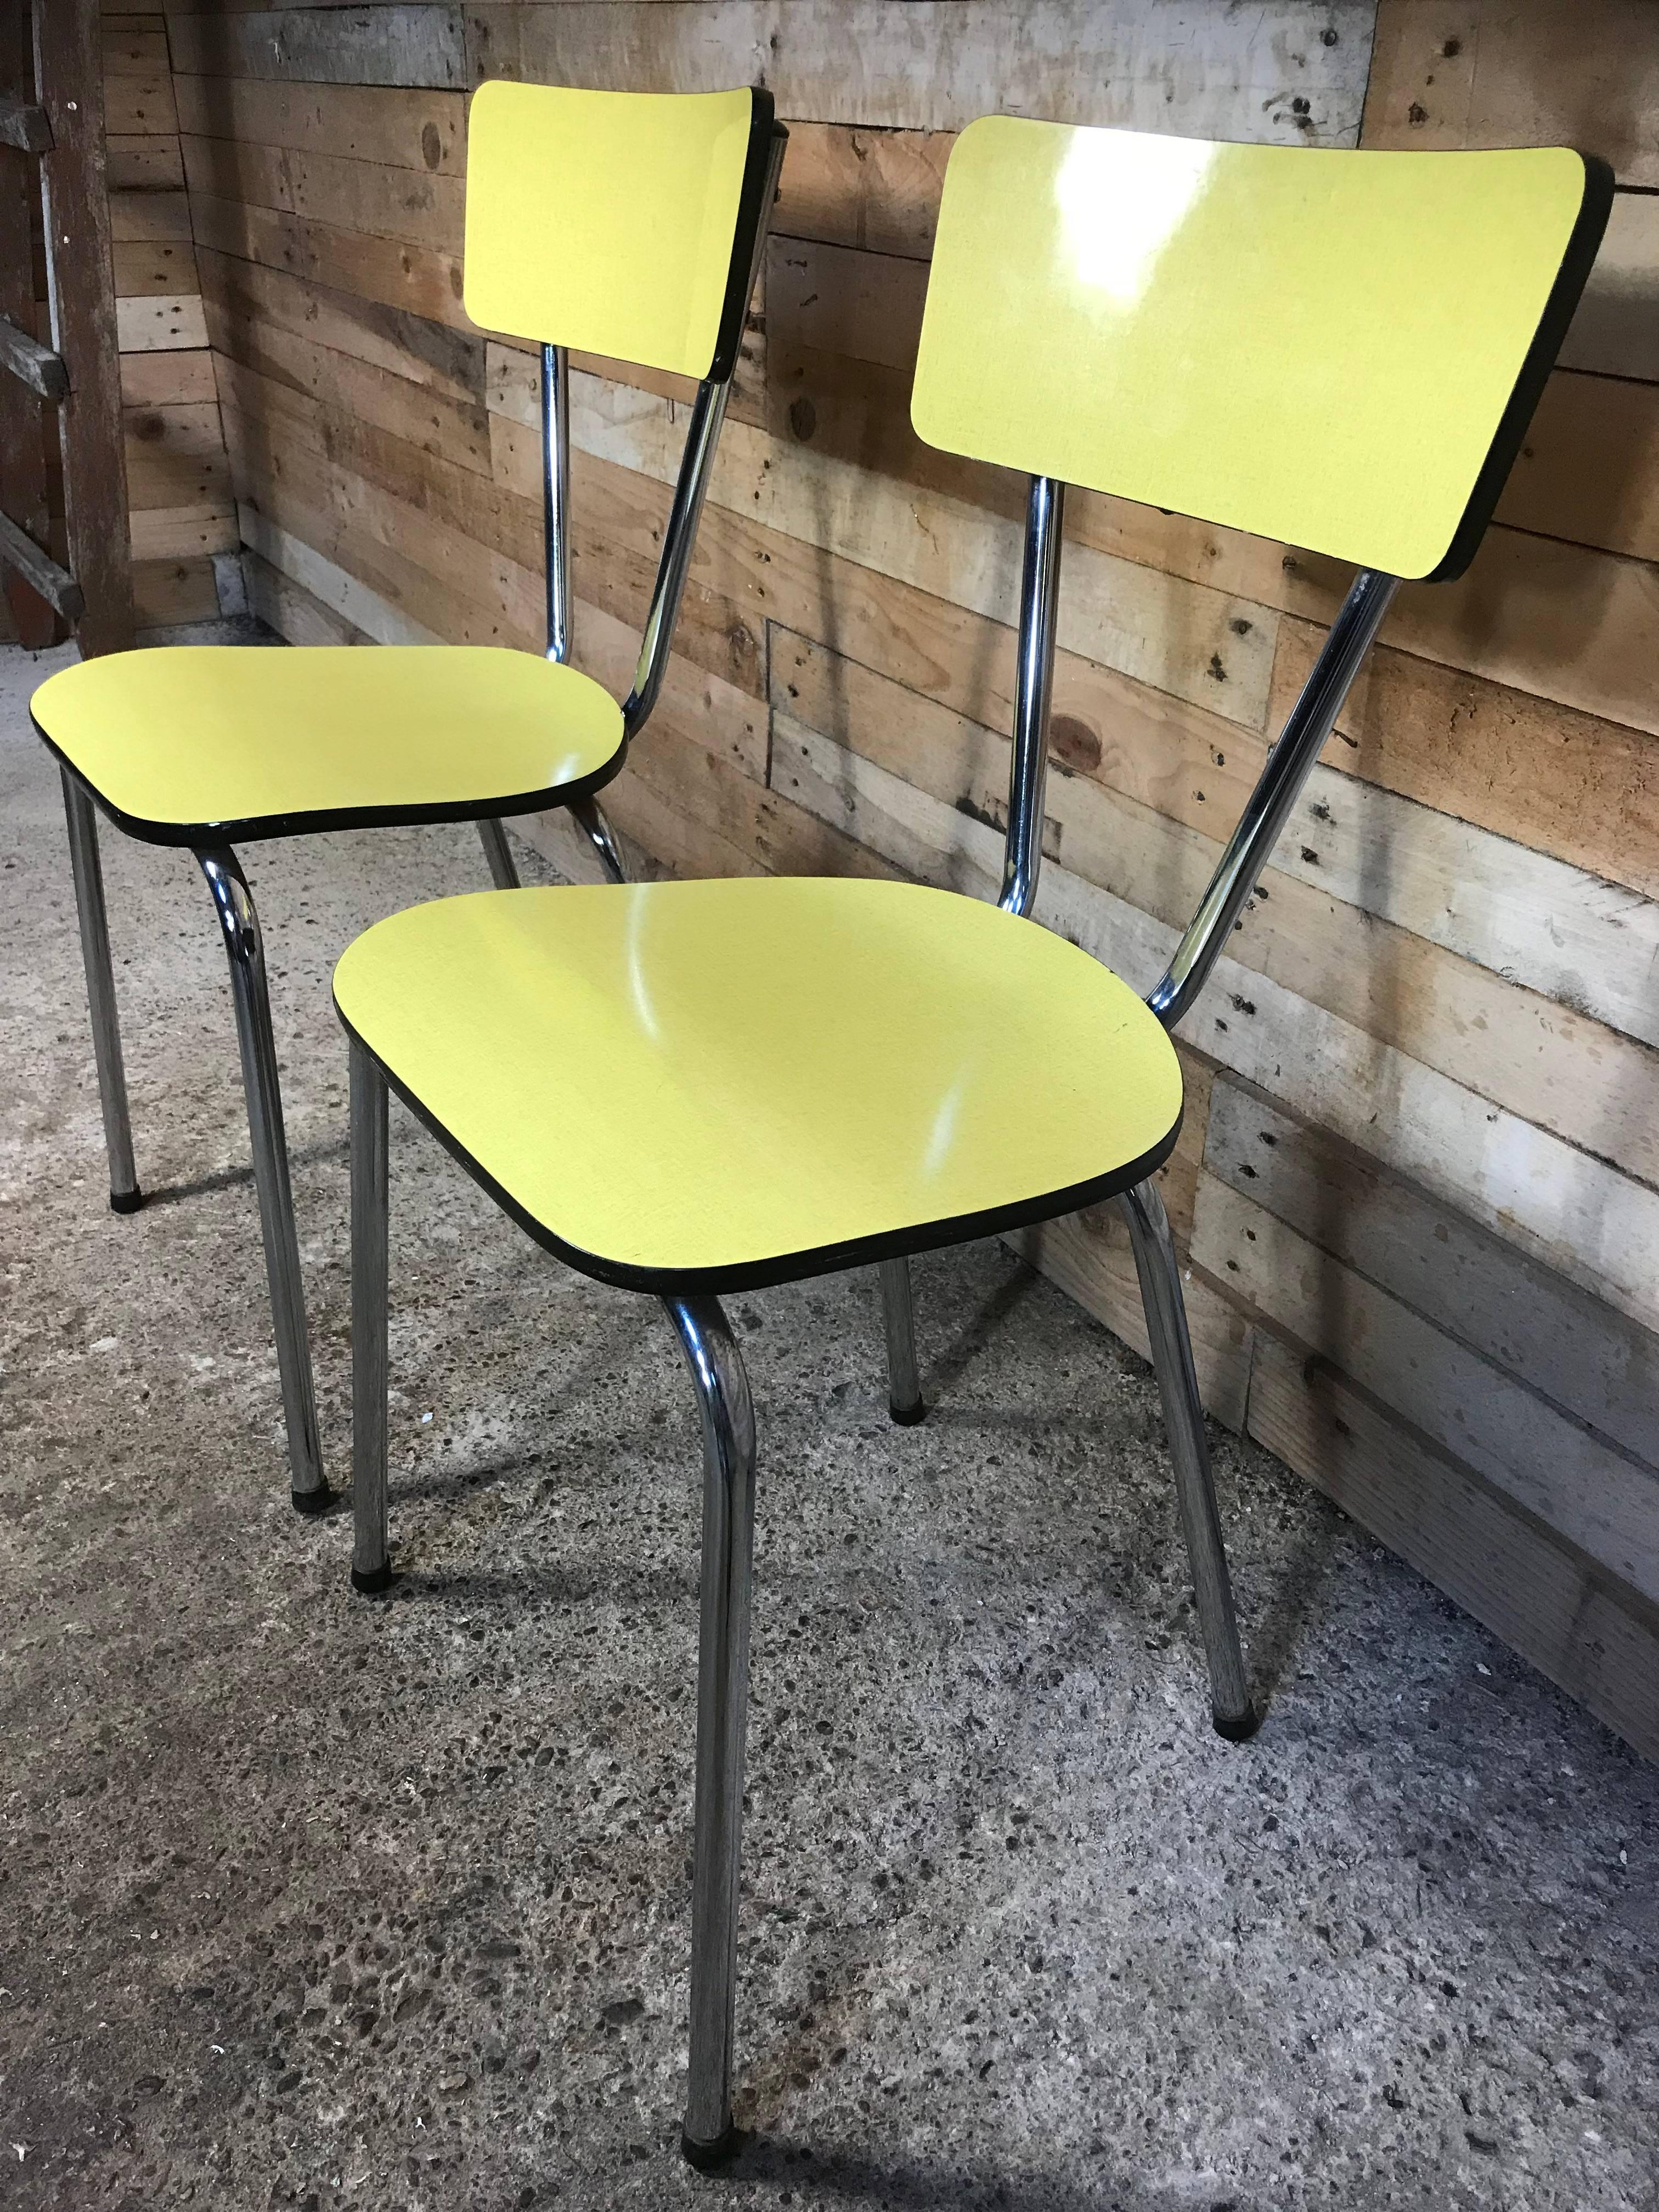 1950s Vintage Retro Yellow and Chrome Melamine Chairs In Good Condition For Sale In Markington, GB